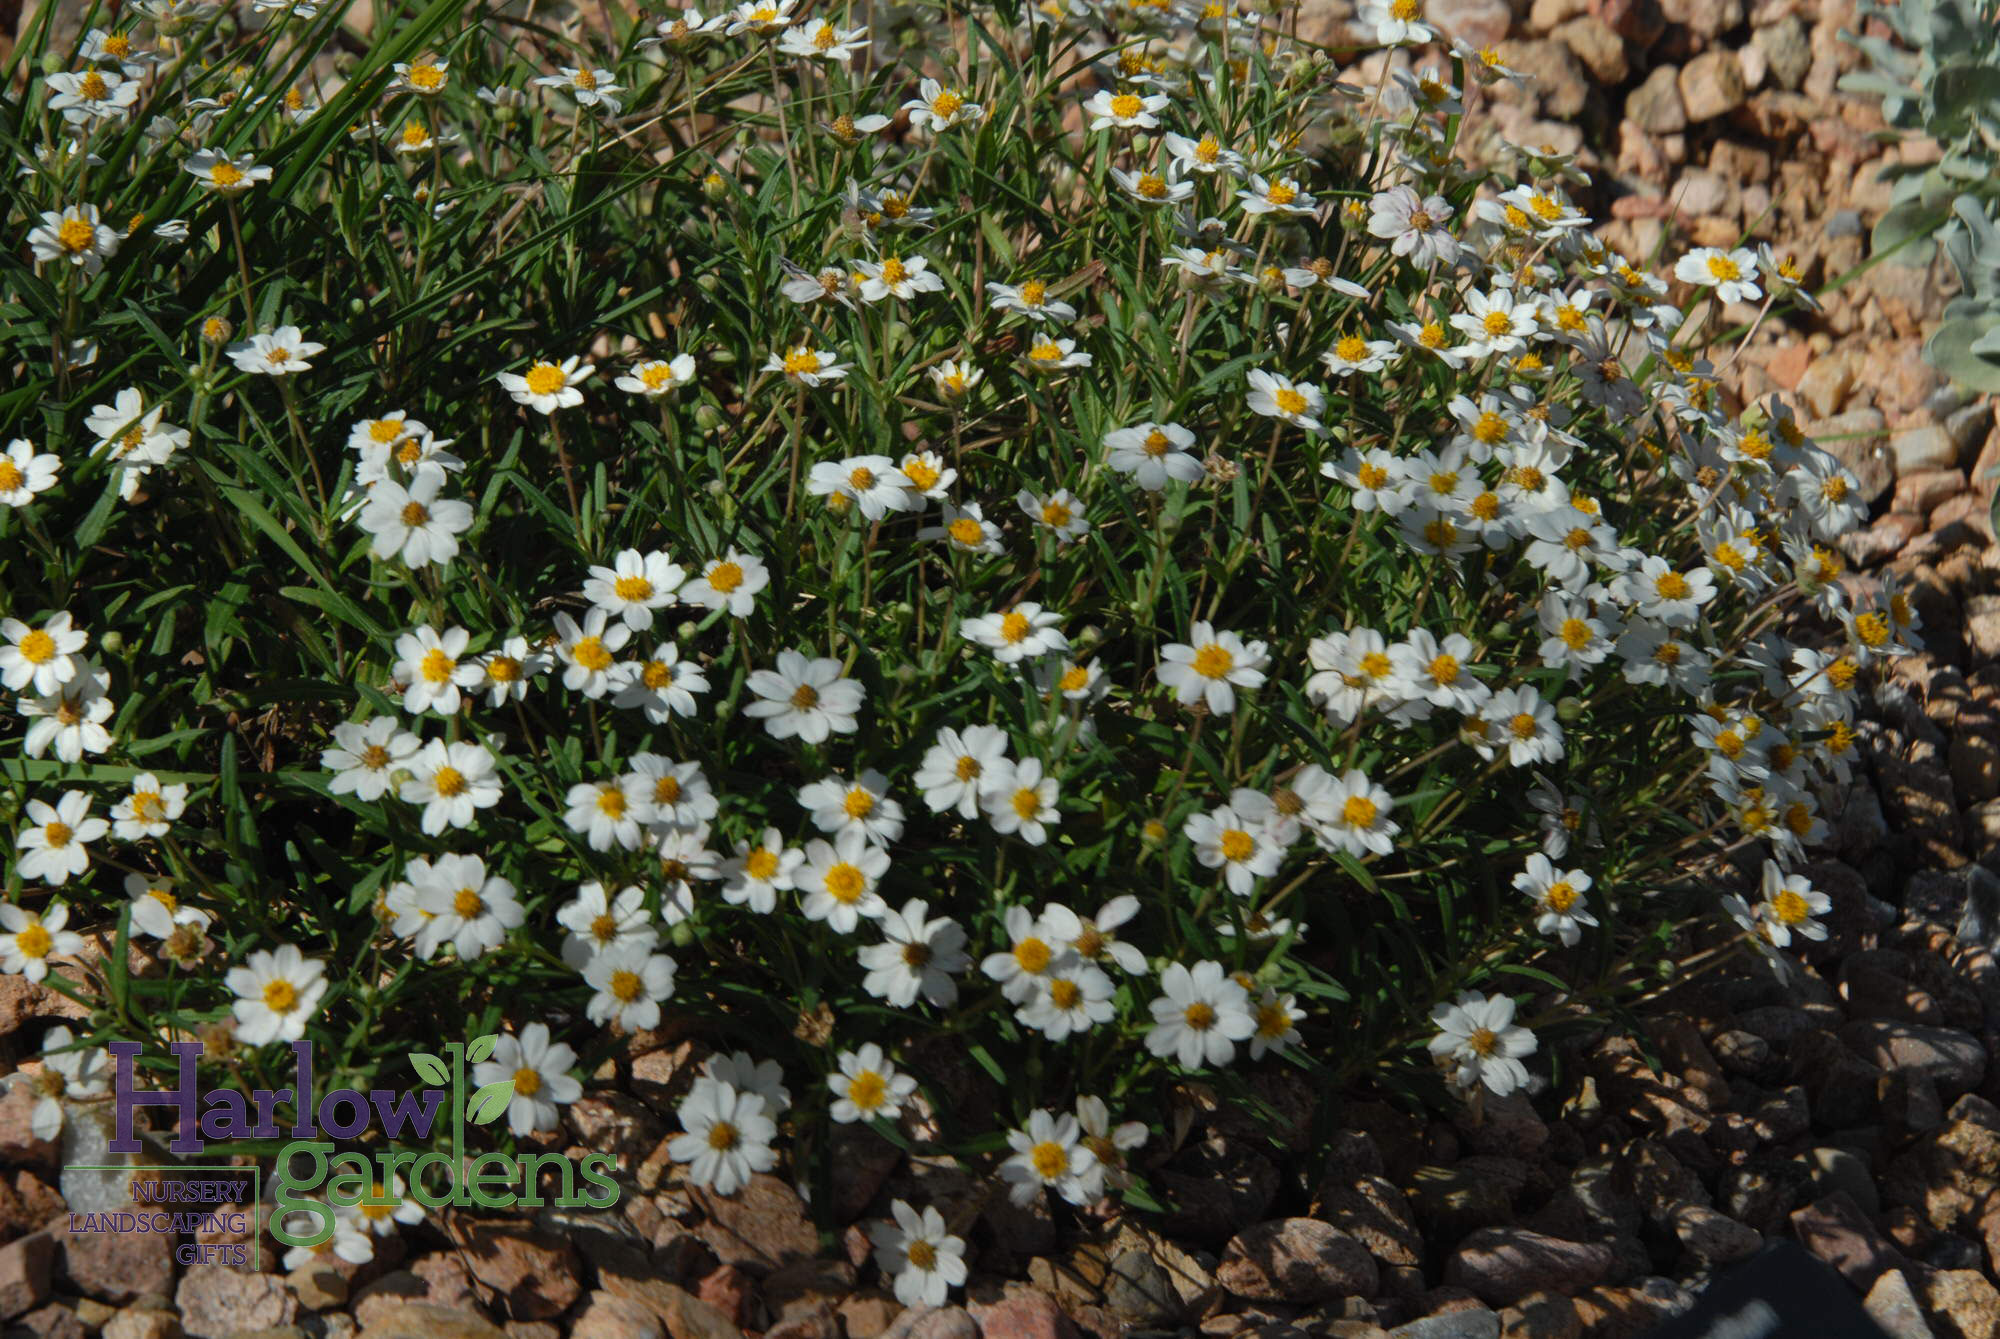 Blackfoot Daisy for sale at Harlow Gardens Tucson.